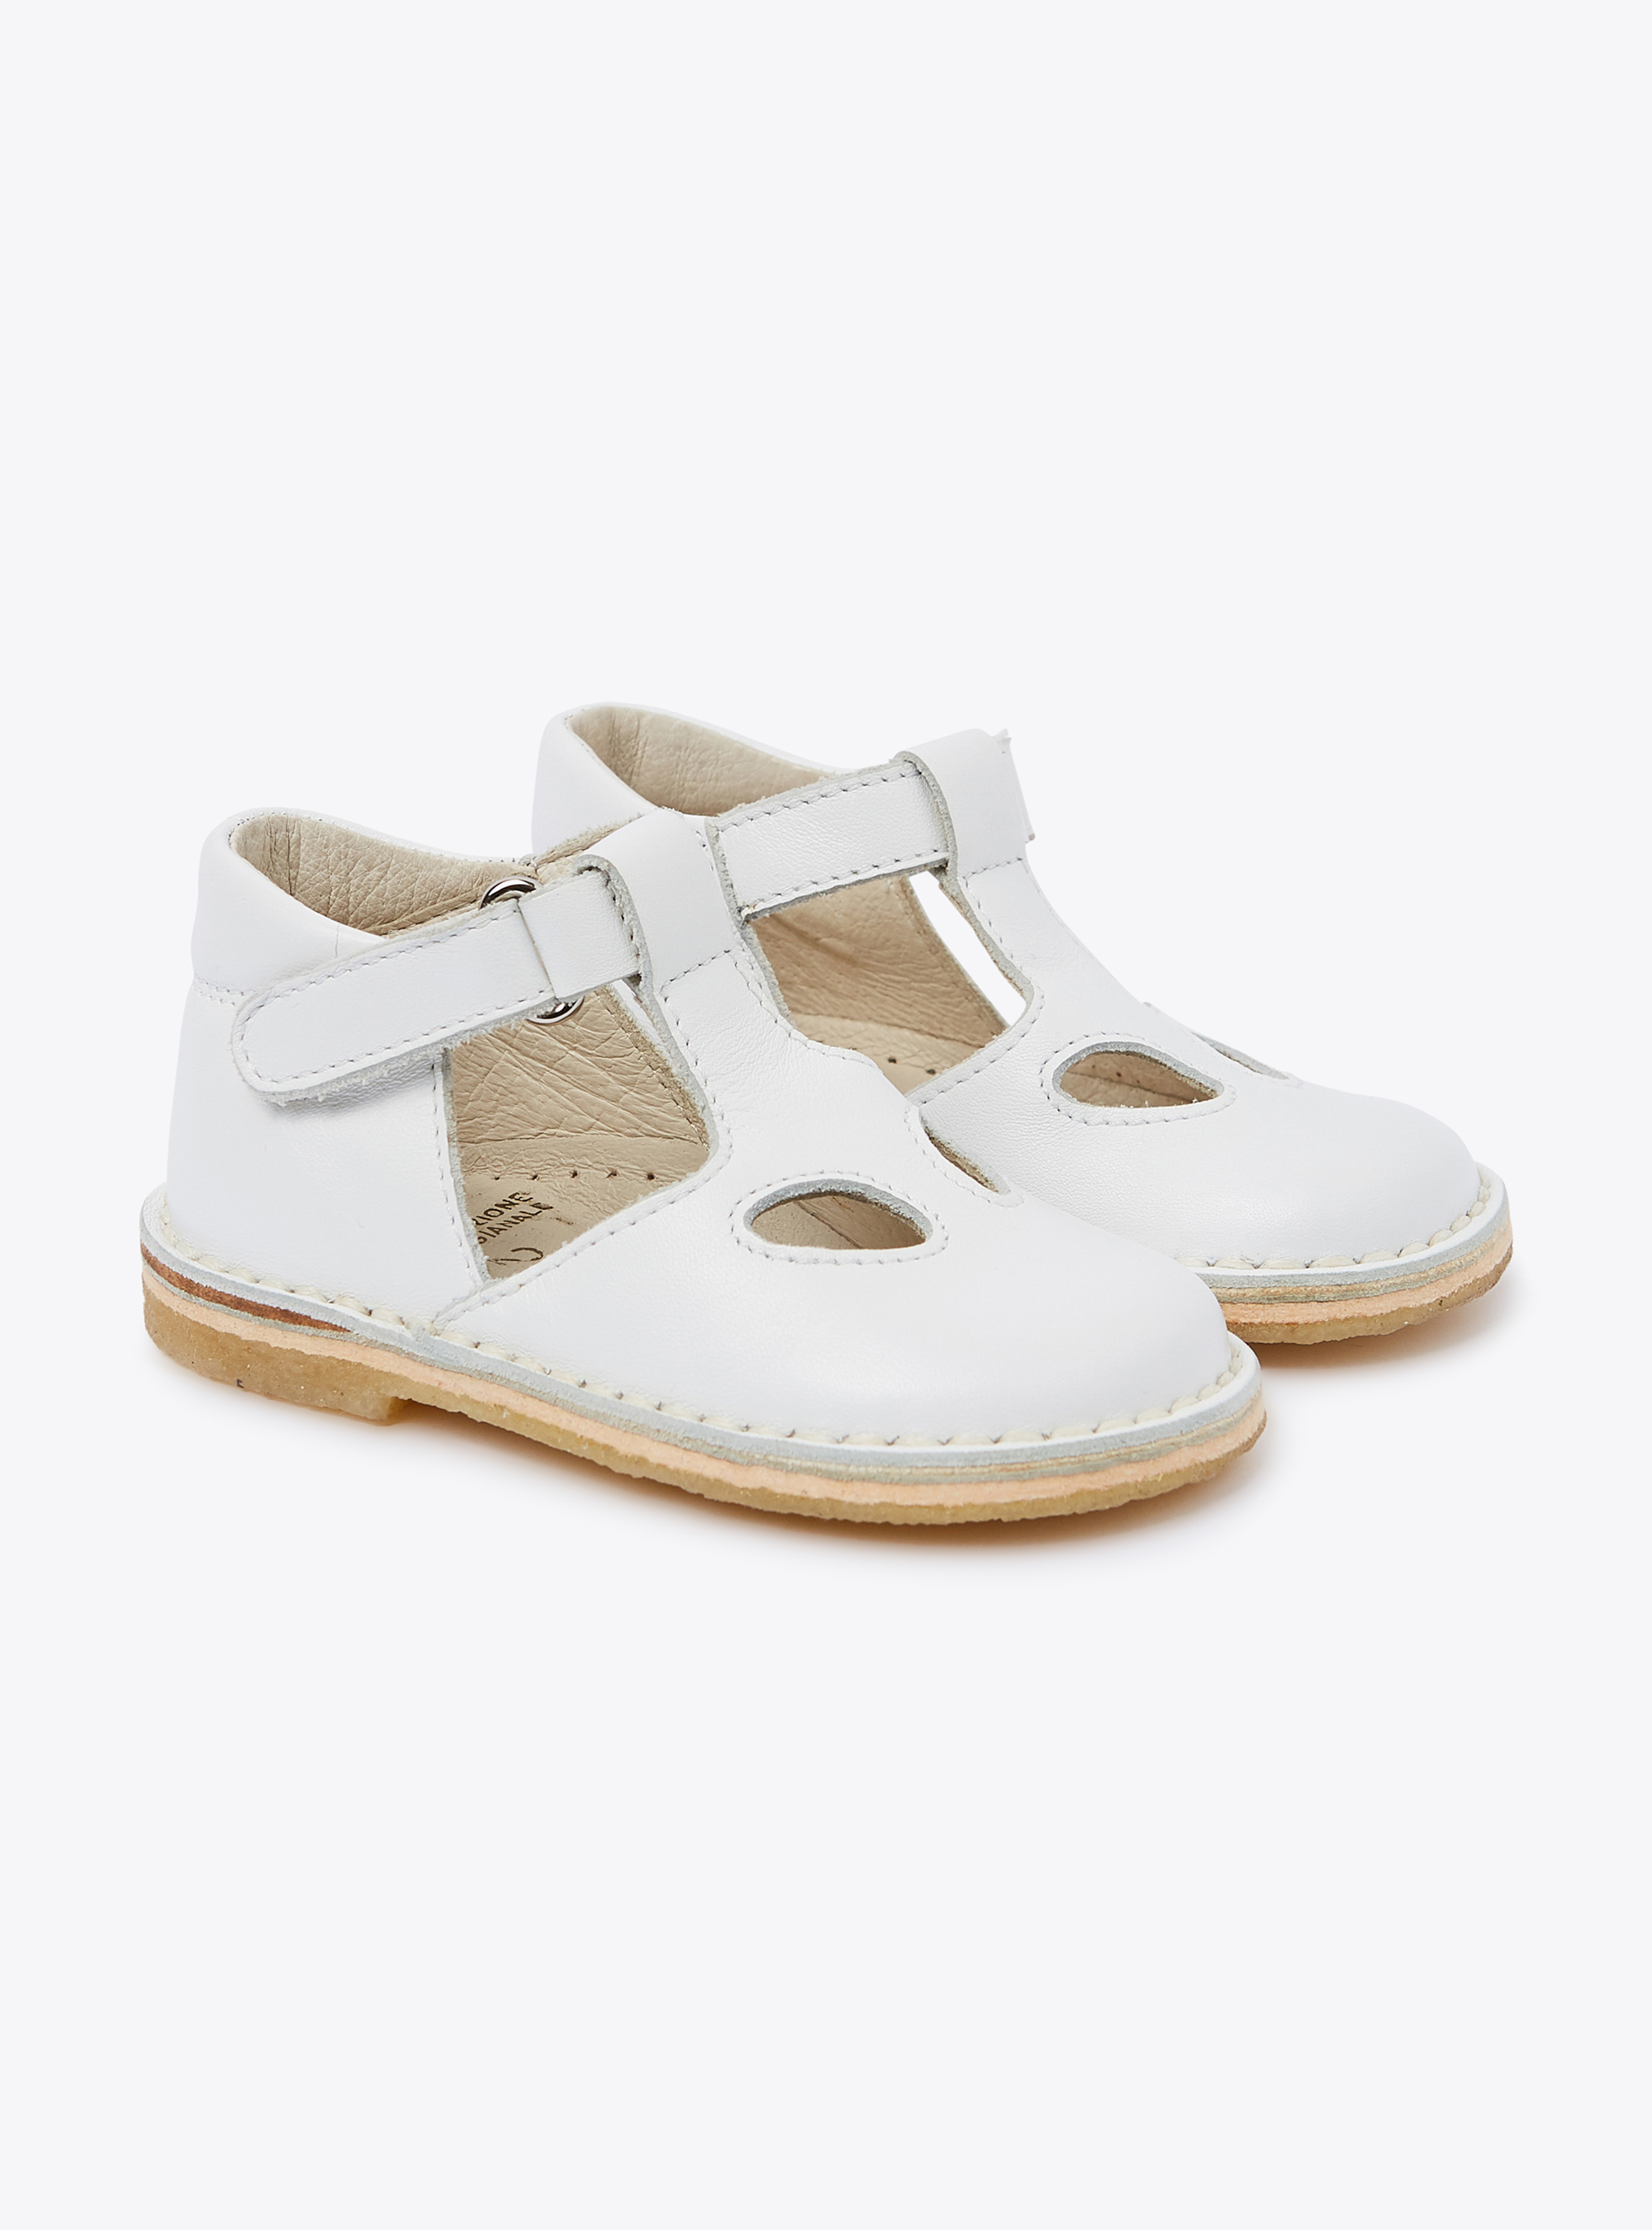 White leather sandals with two holes - Shoes - Il Gufo